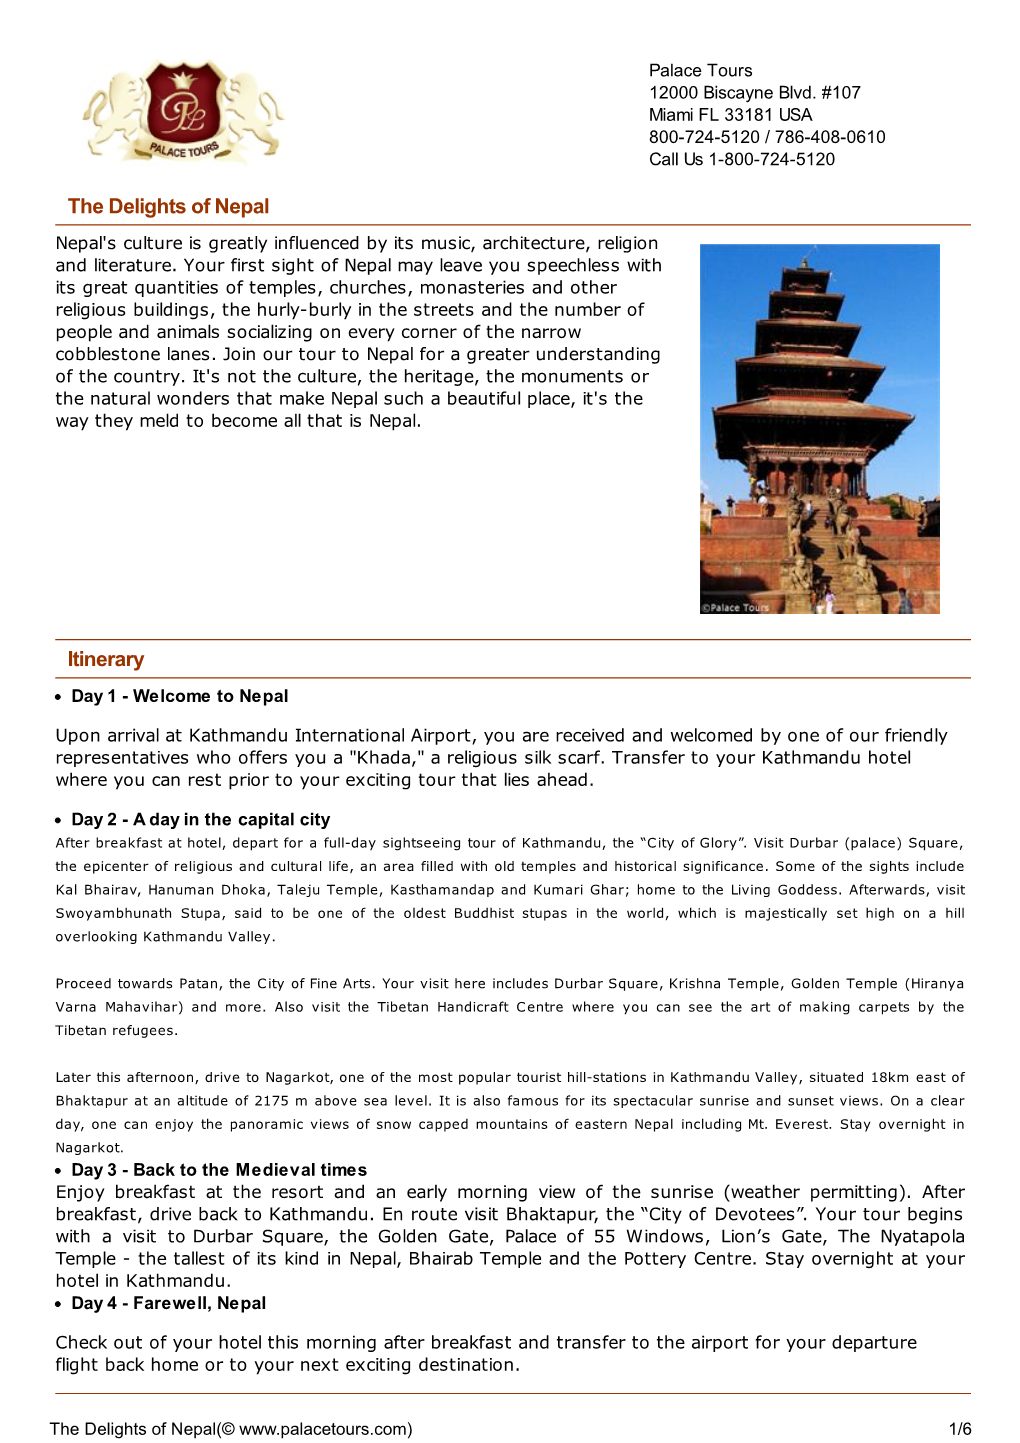 The Delights of Nepal Itinerary